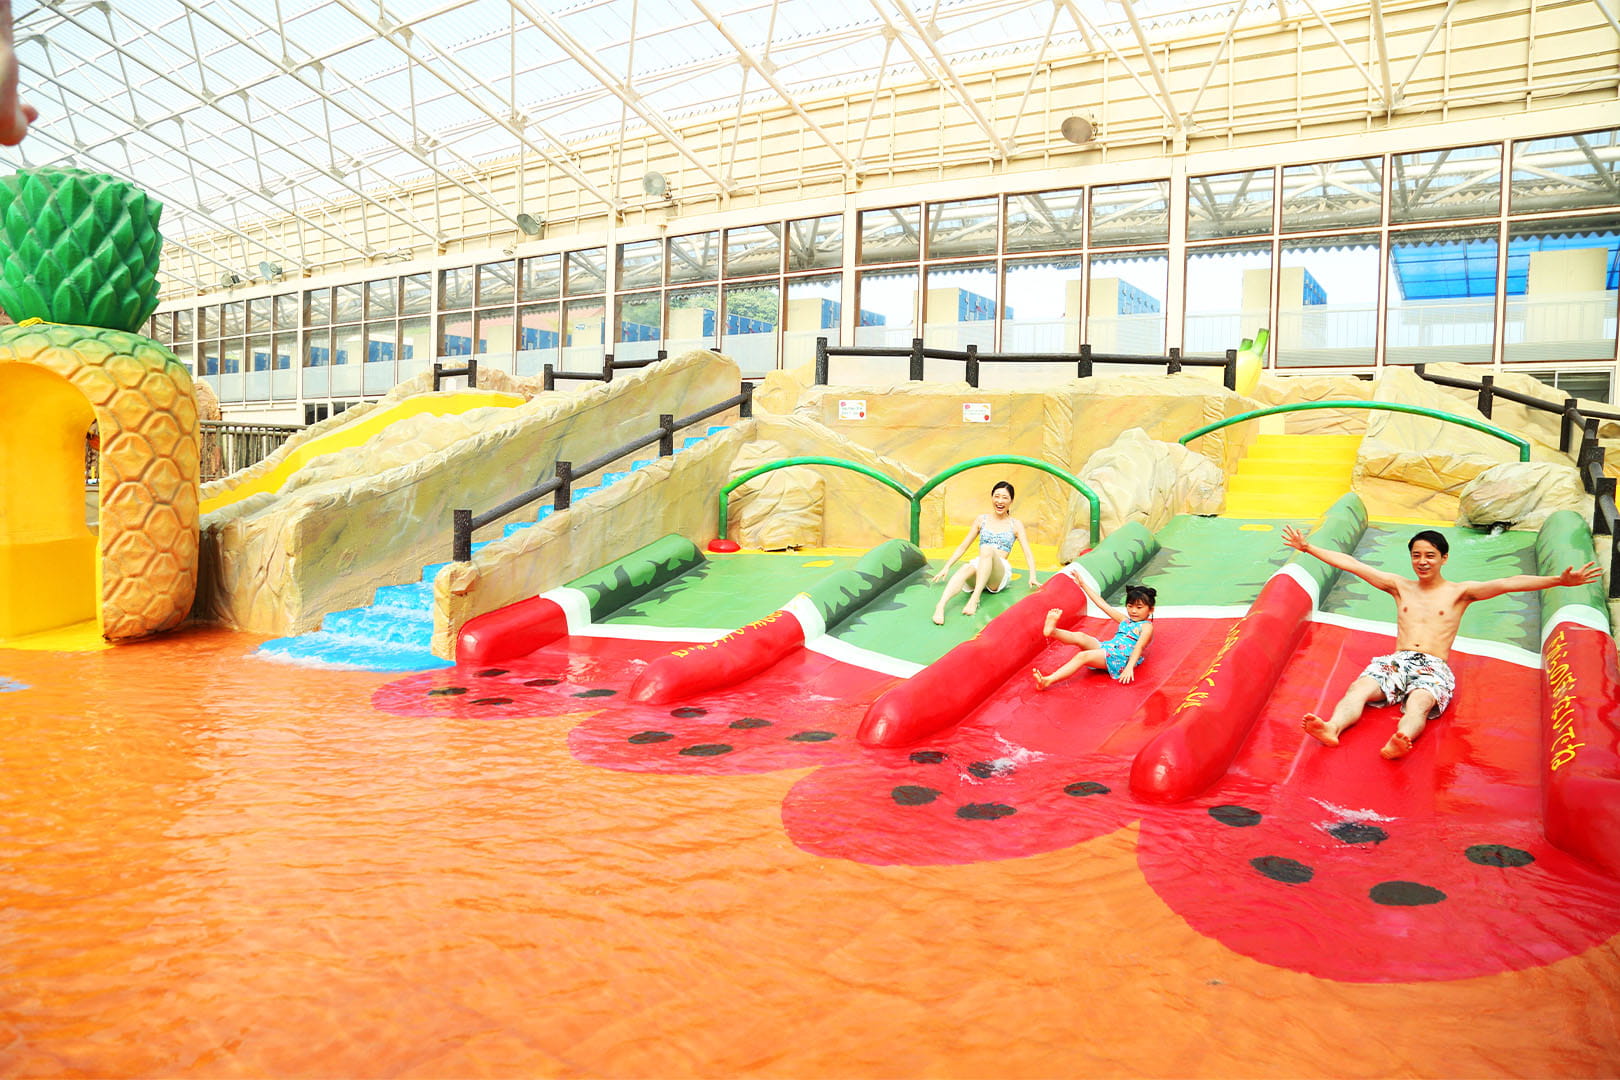 Get in the summer mood with the colorful fruits at Fruits Island!